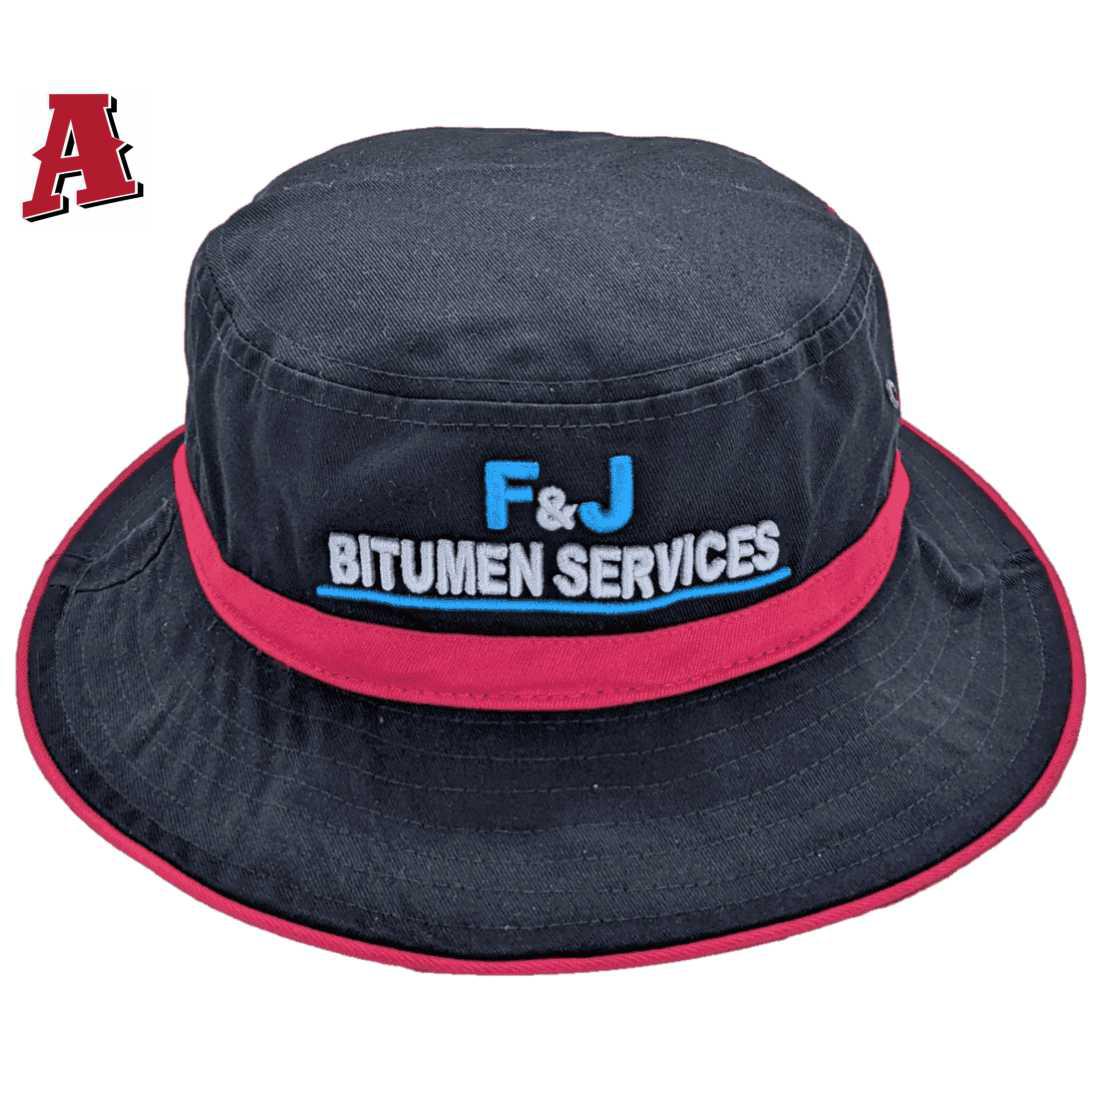 FJ Bitumen Services Humpty Doo NT Aussie Bucket Hat One Size Fits All with Optional Brim Size 5cm to 7.5cm Black Hot Pink